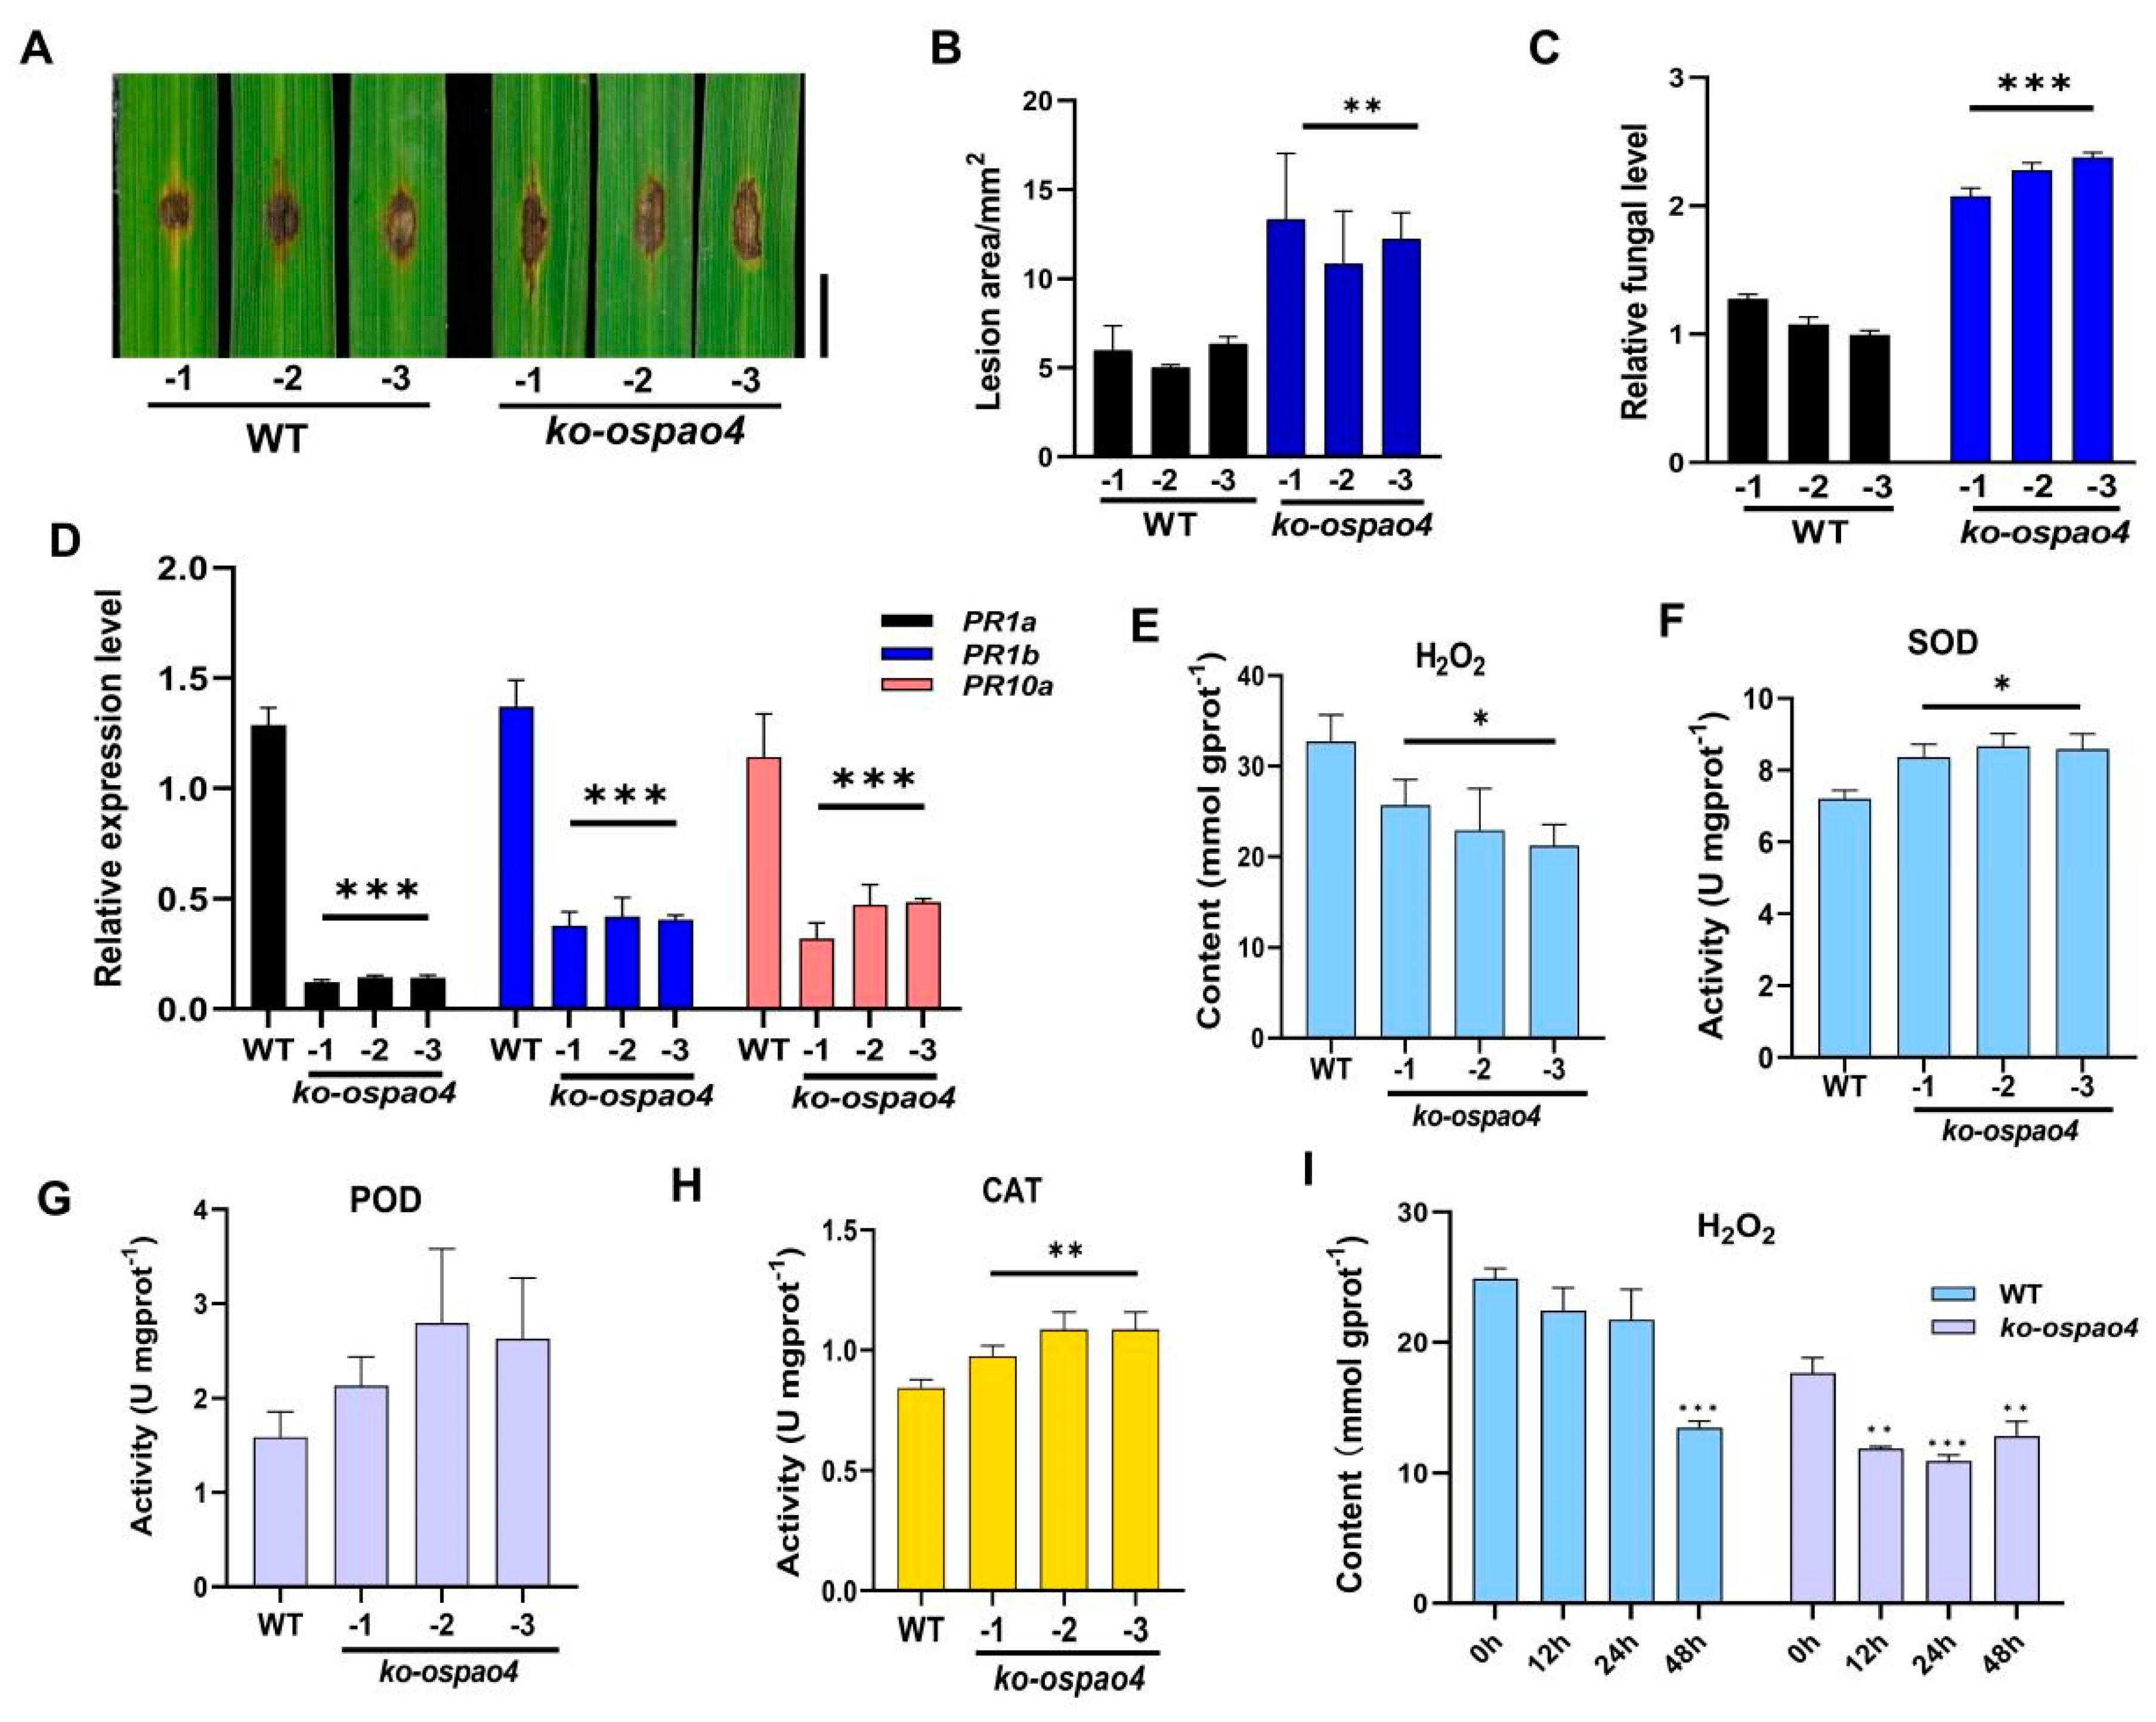 IJMS | Free Full-Text | Osa-miR11117 Targets OsPAO4 to Regulate 